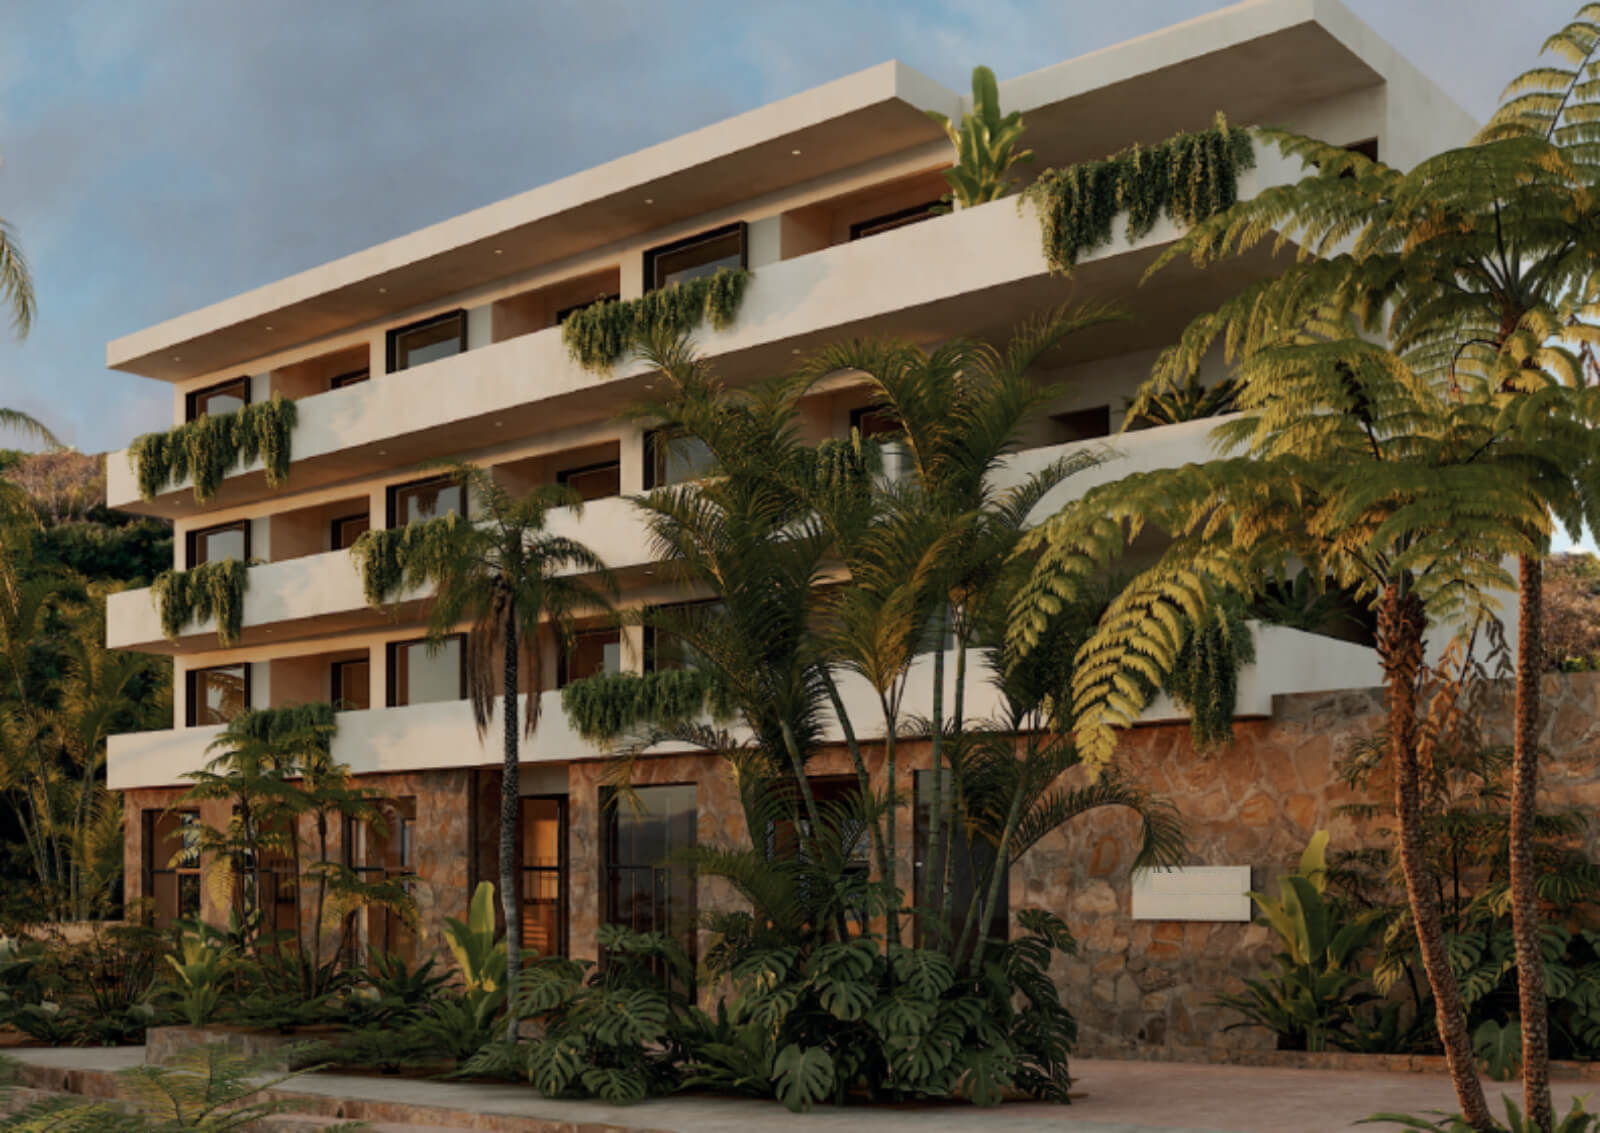 Two-level luxury condo with private pool, pet-friendly, for sale in Huatulco.